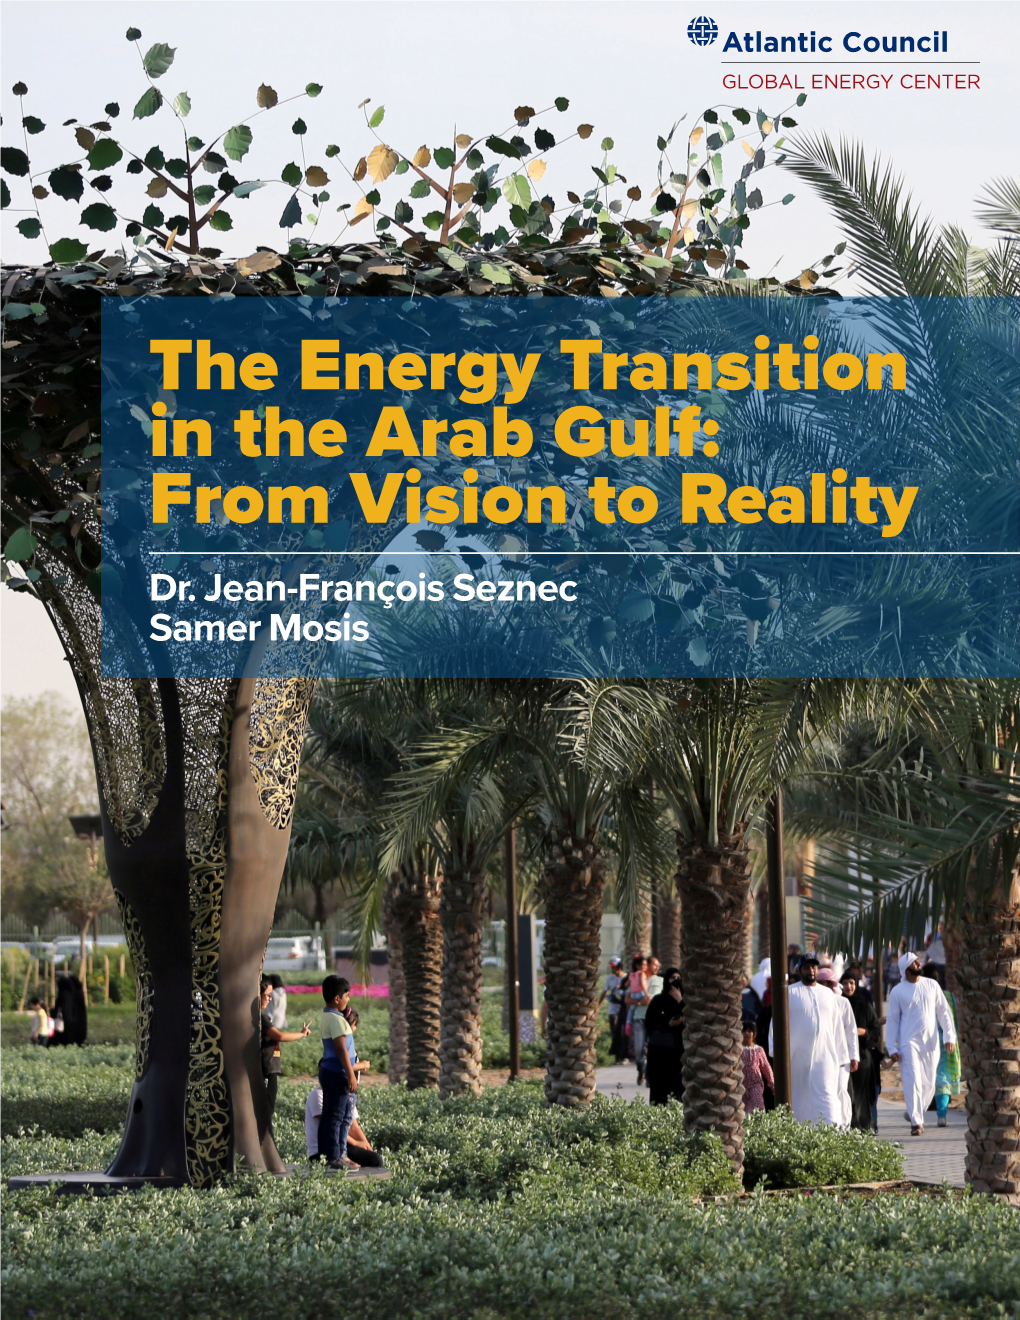 THE ENERGY TRANSITION in the ARAB GULF Atlantic Council GLOBAL ENERGY CENTER